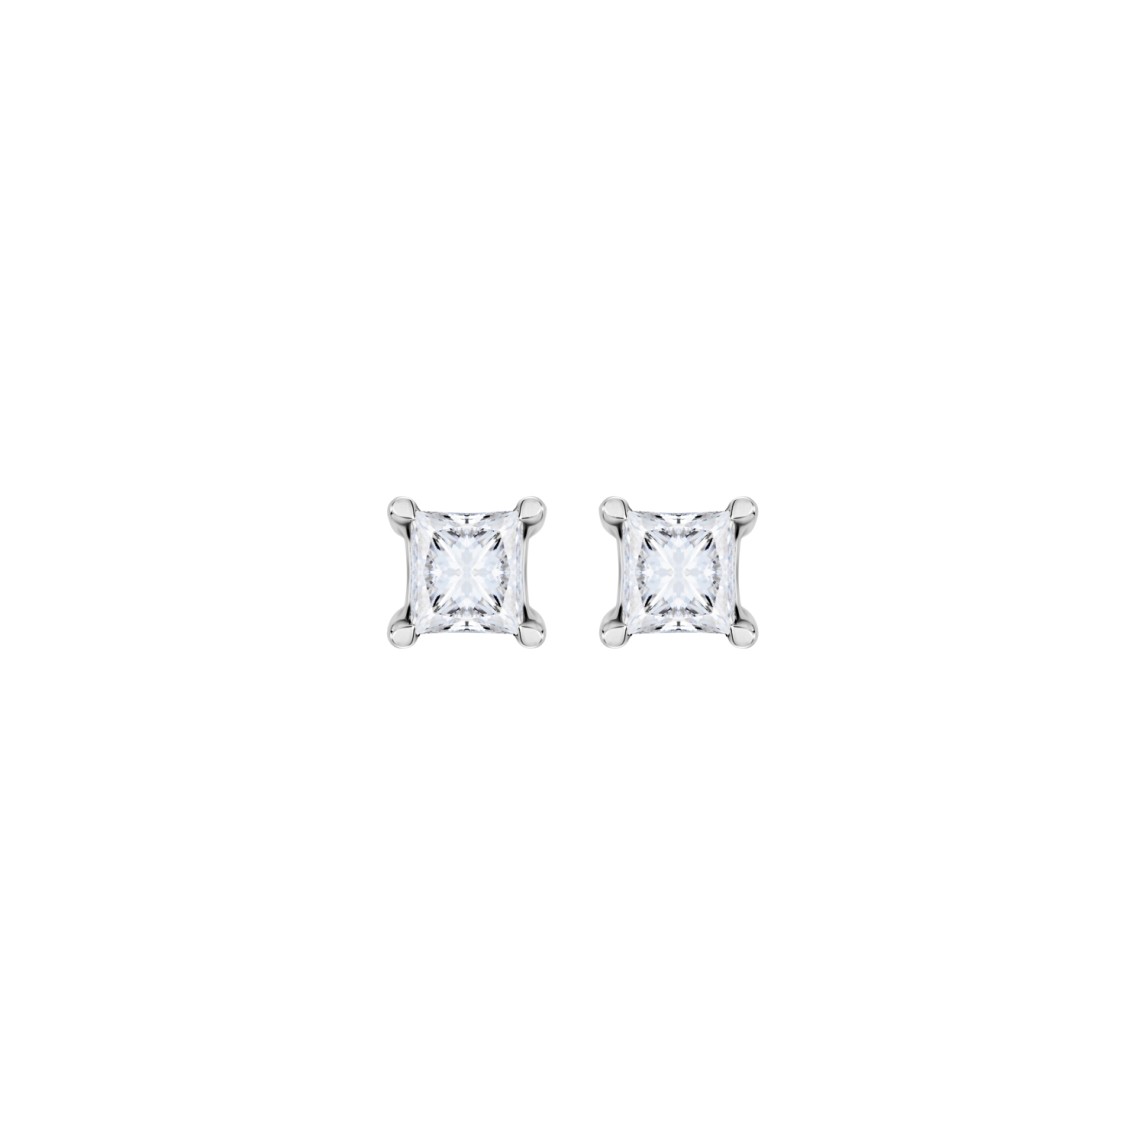 White Gold Earrings With Princess-Cut Diamonds